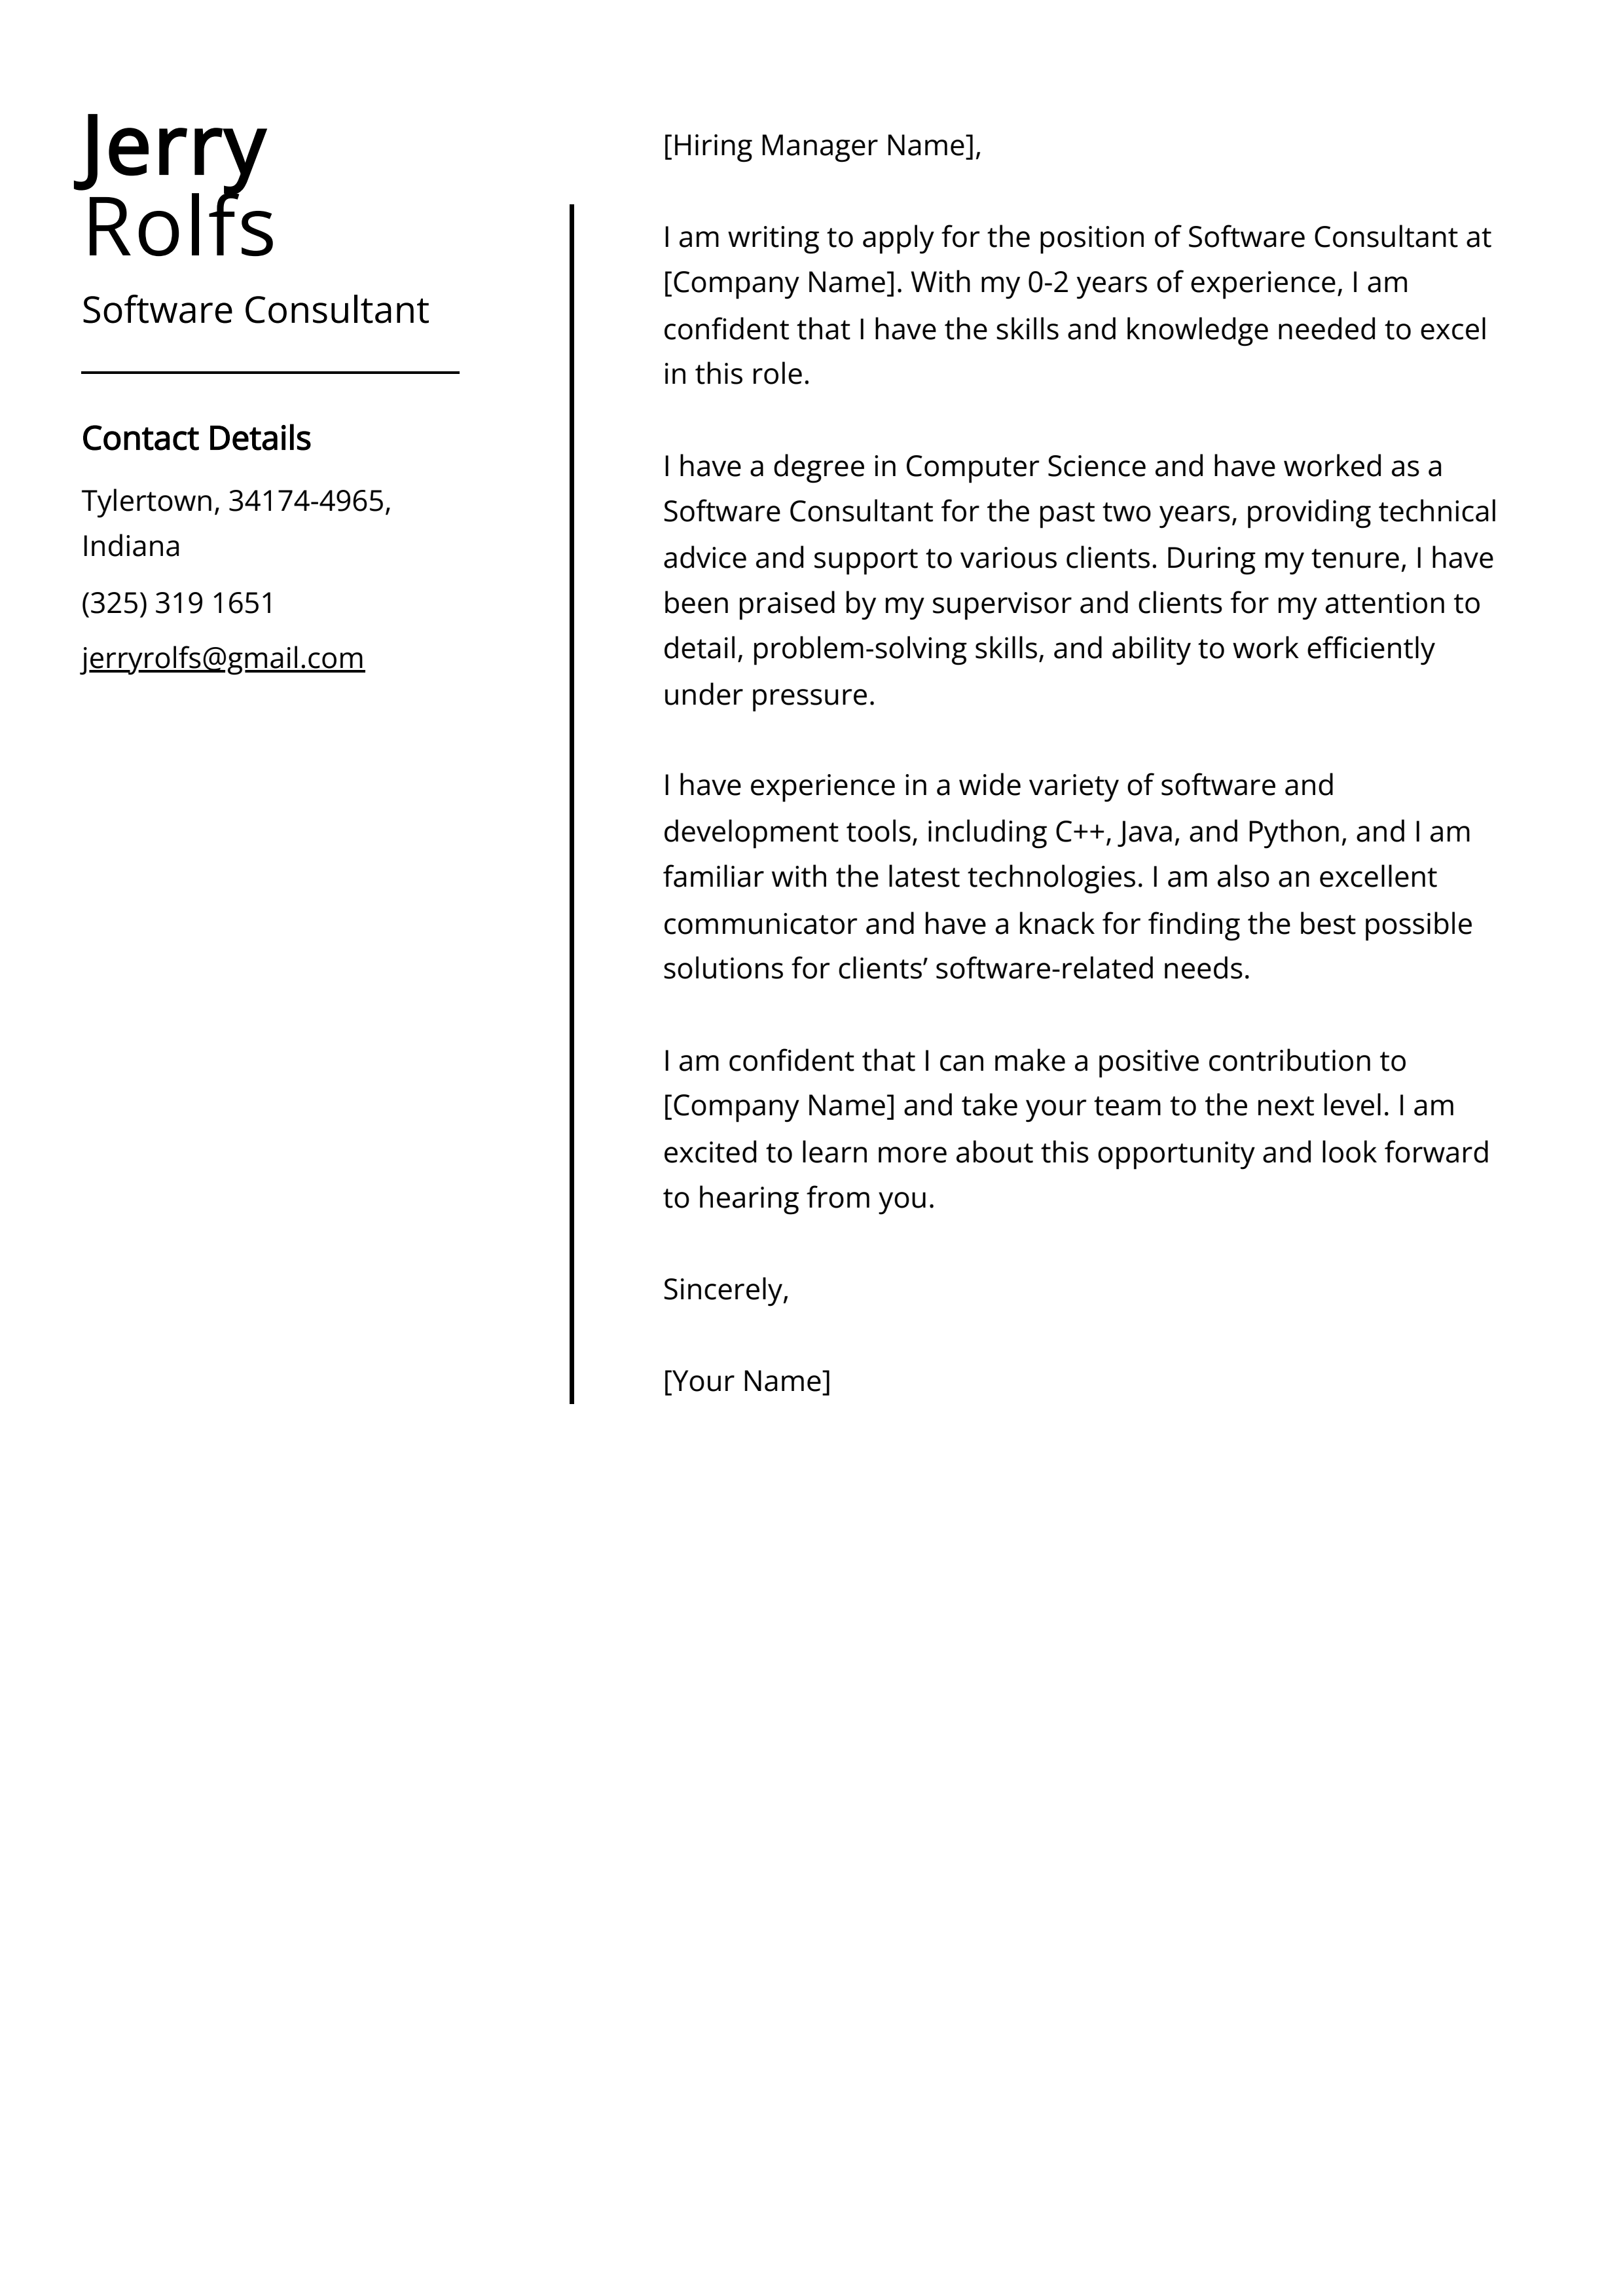 Software Consultant Cover Letter Example